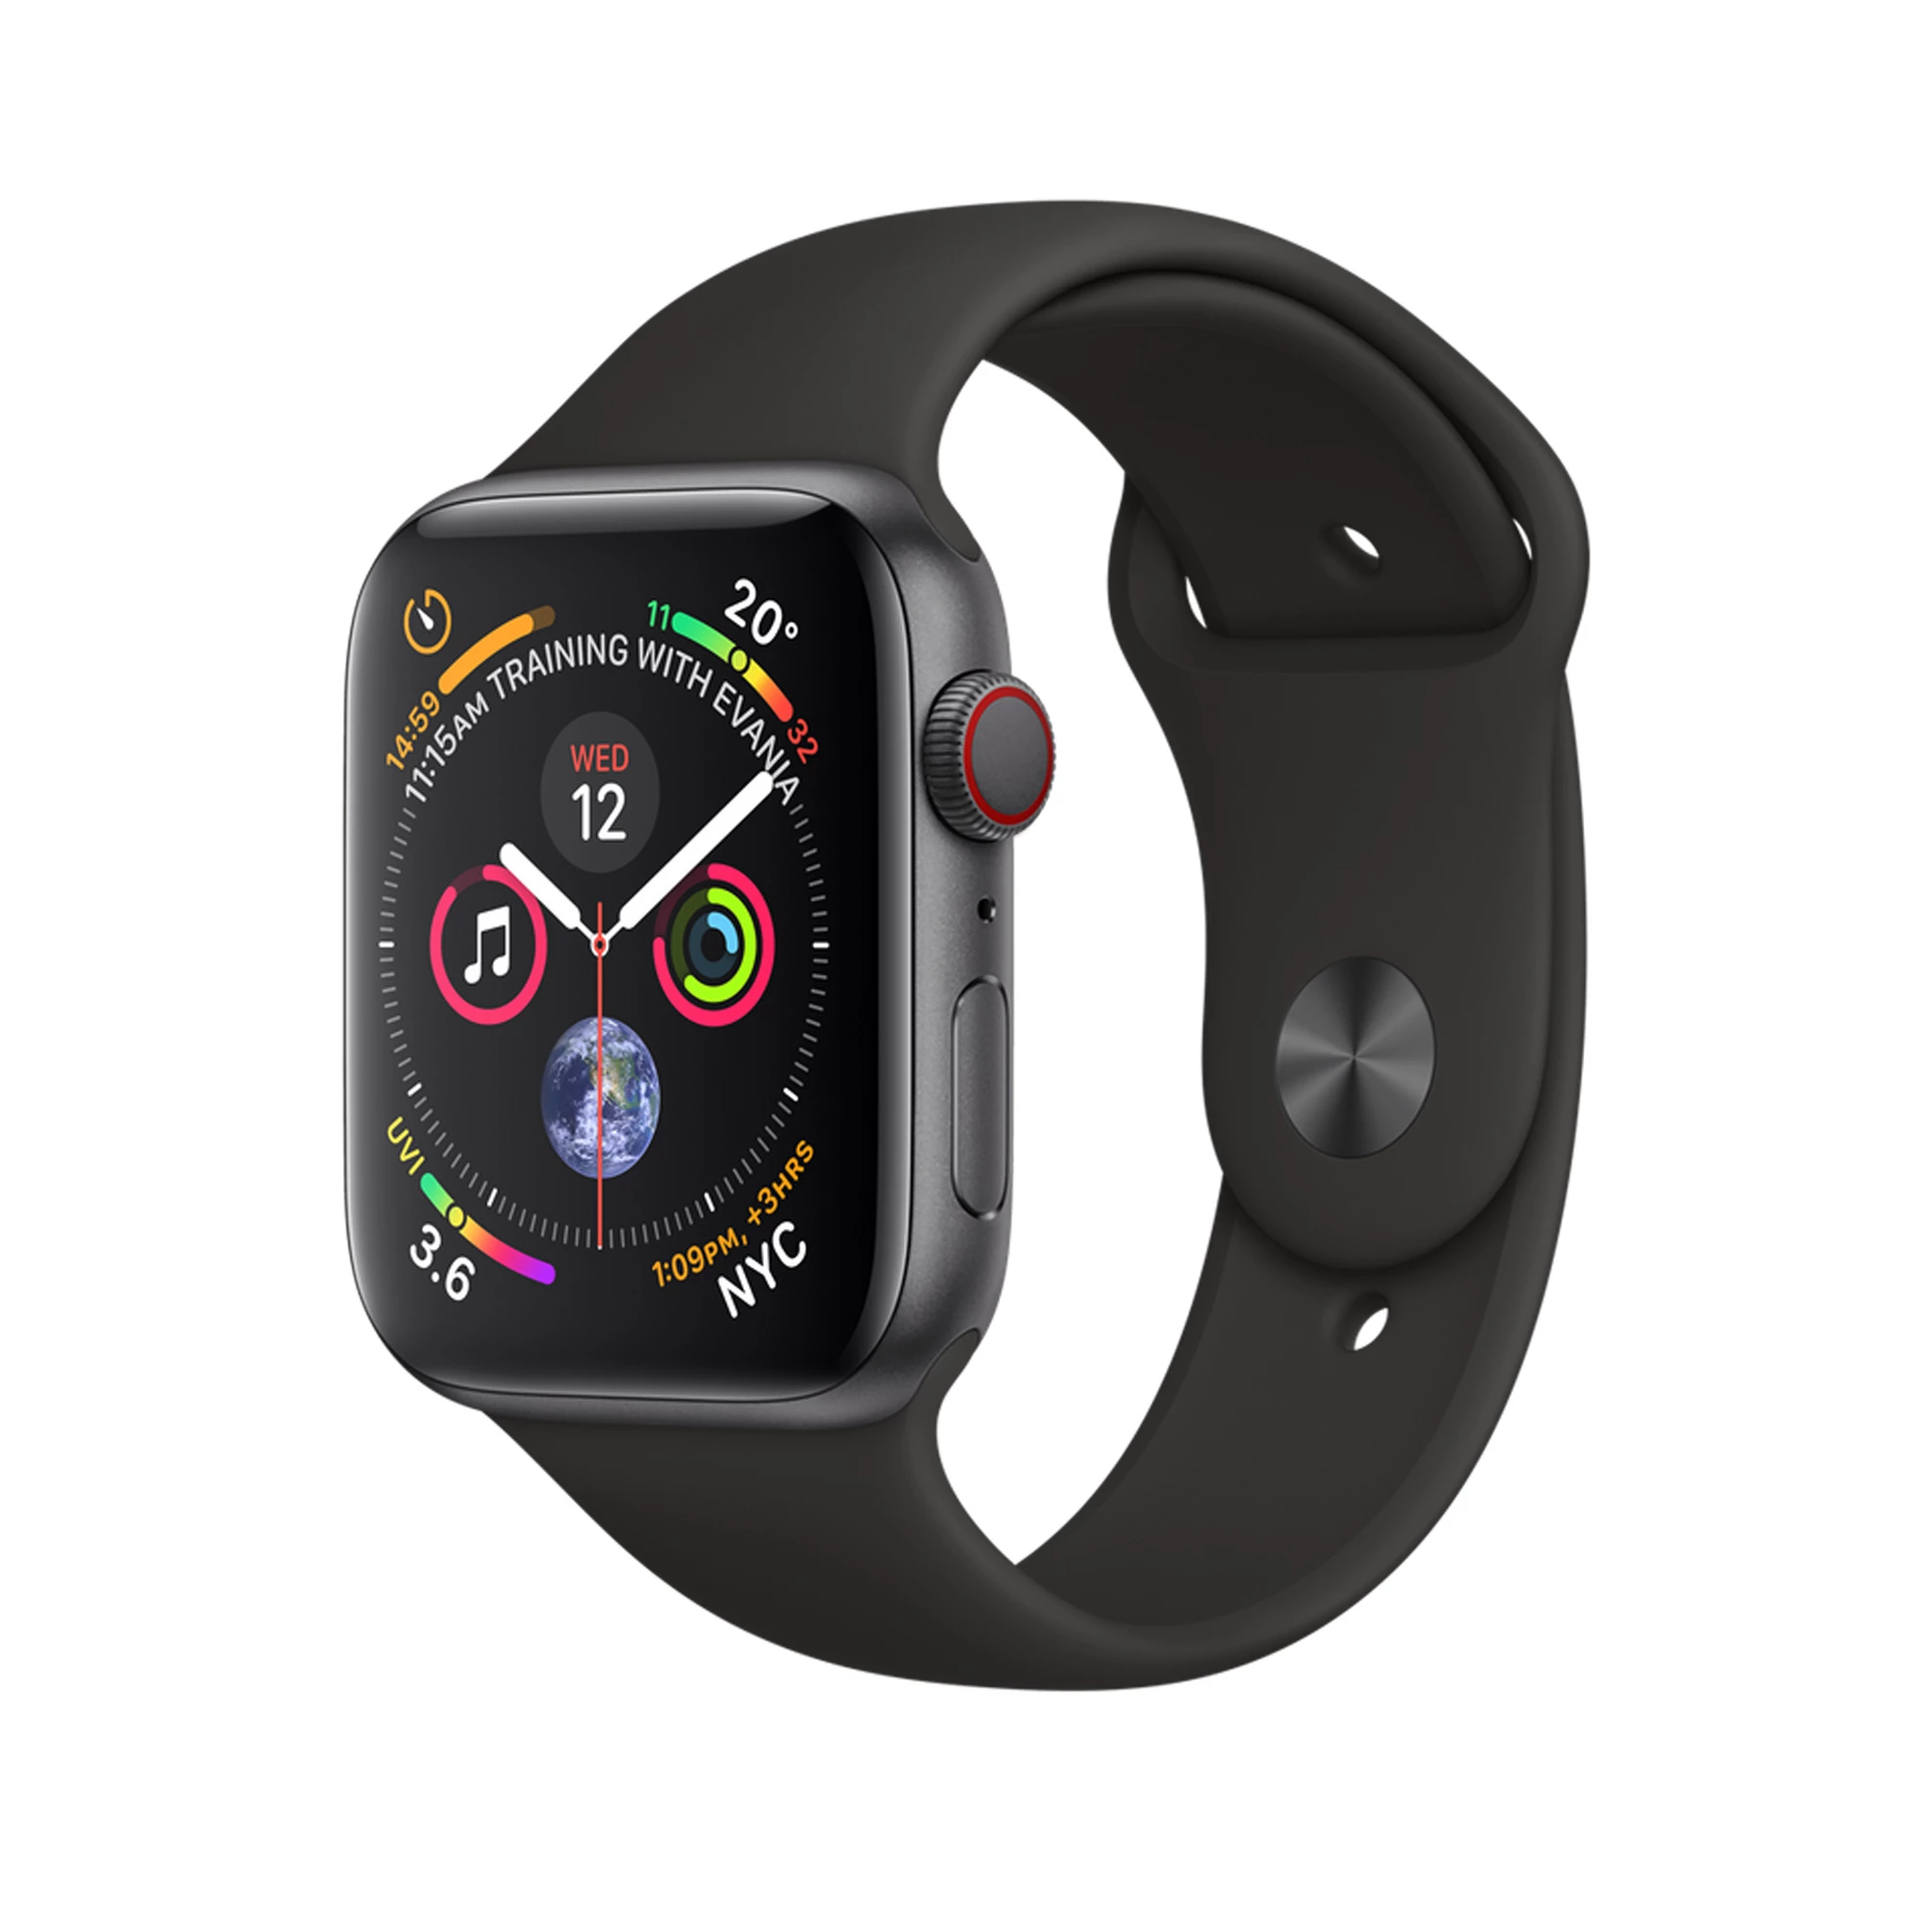 Apple Watch Series 4 (GPS + Cellular) 40mm Space Gray Aluminium Case with Black Sport Band (MTUG2, MTVD2)